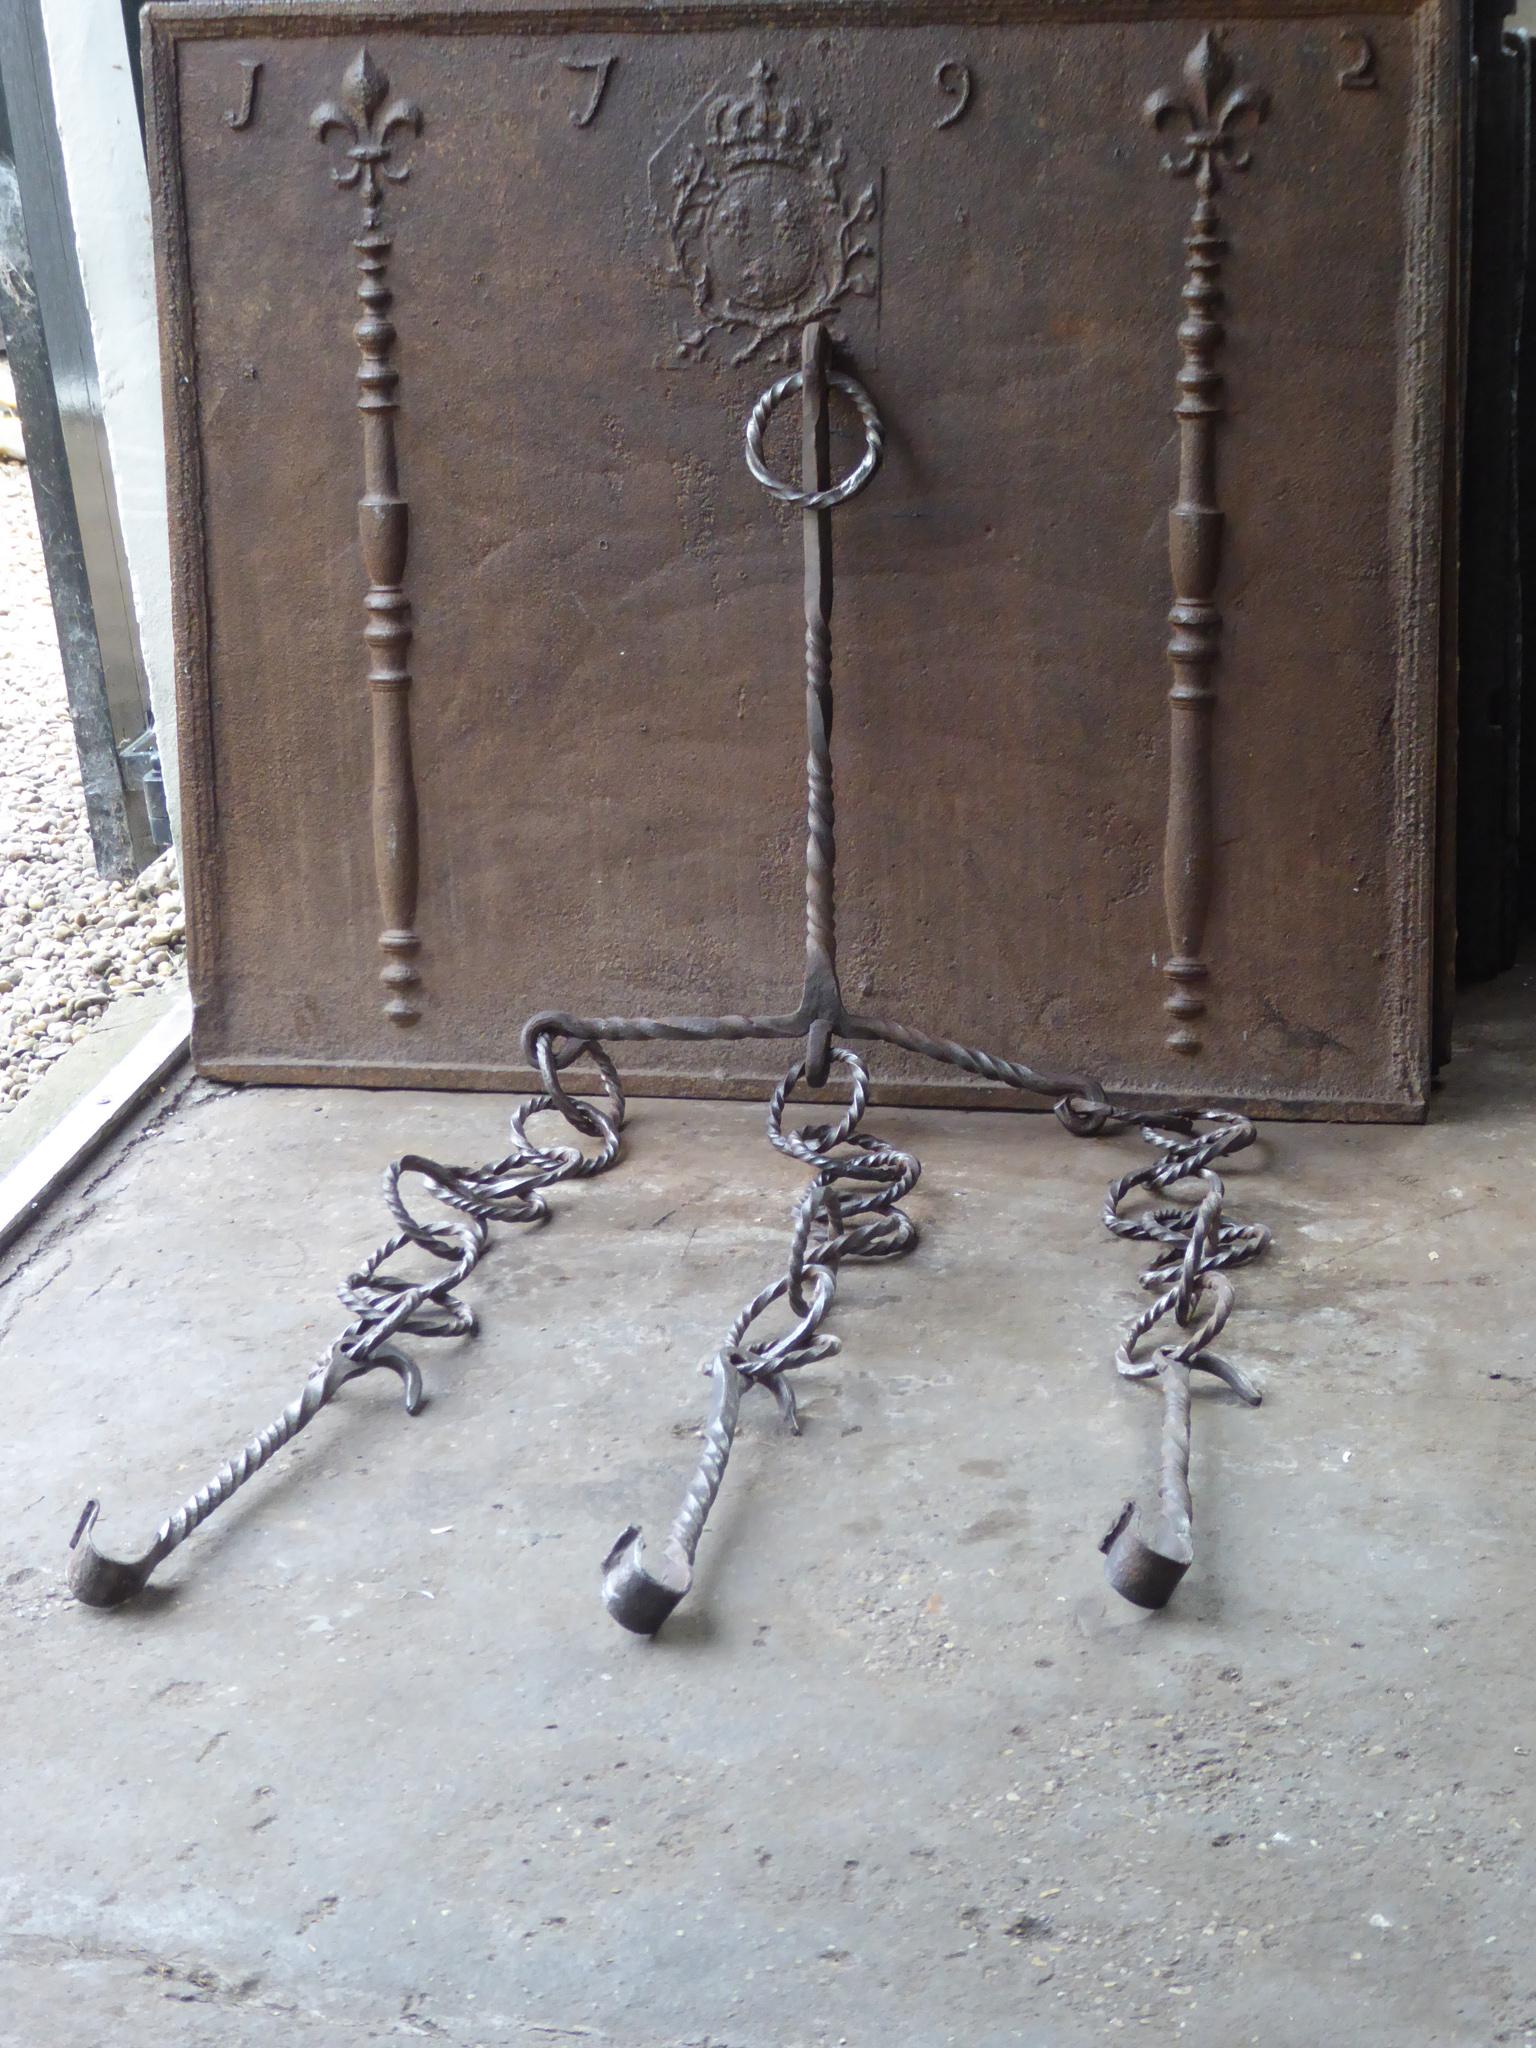 17th century French Louis XIV period fireplace trammel made of wrought iron. 

The trammel was used for cooking to regulate the distance between the pot and the fire. The trammel is still functional.
 